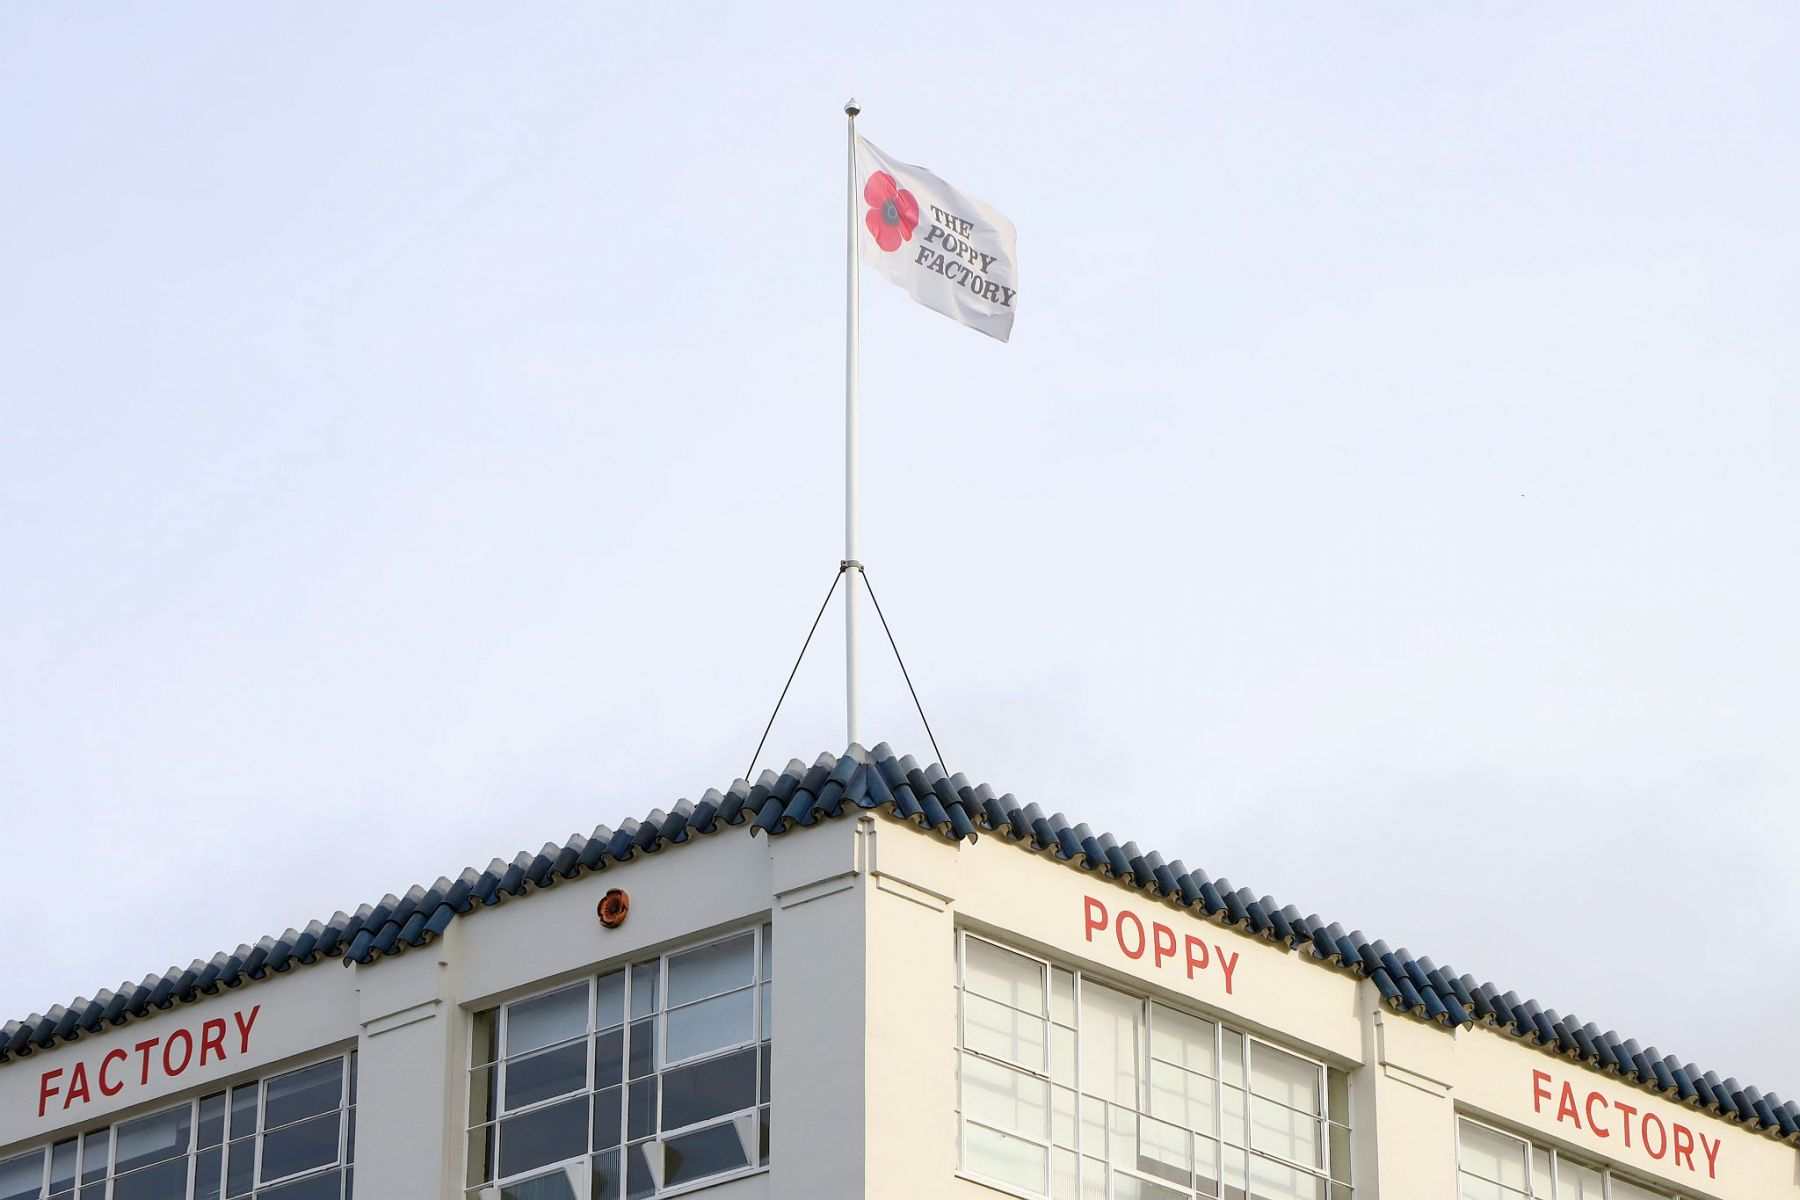 The flag flying over the Poppy Factory in Richmond, SW London